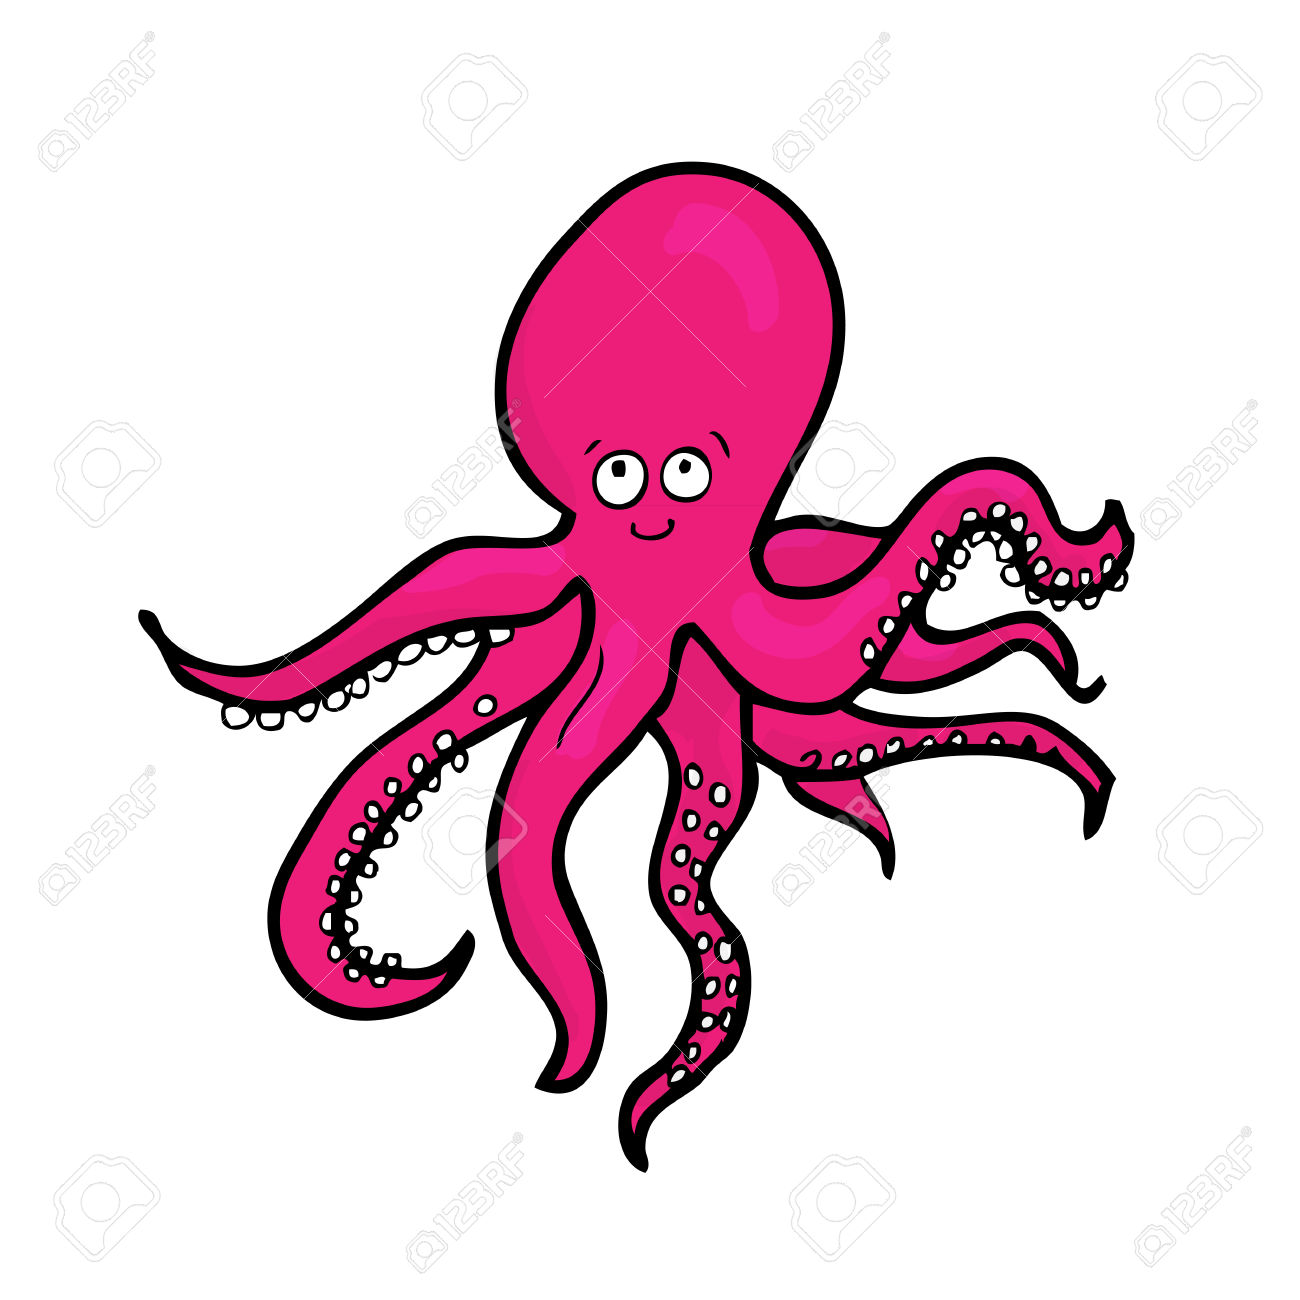 Squid clipart #3, Download drawings